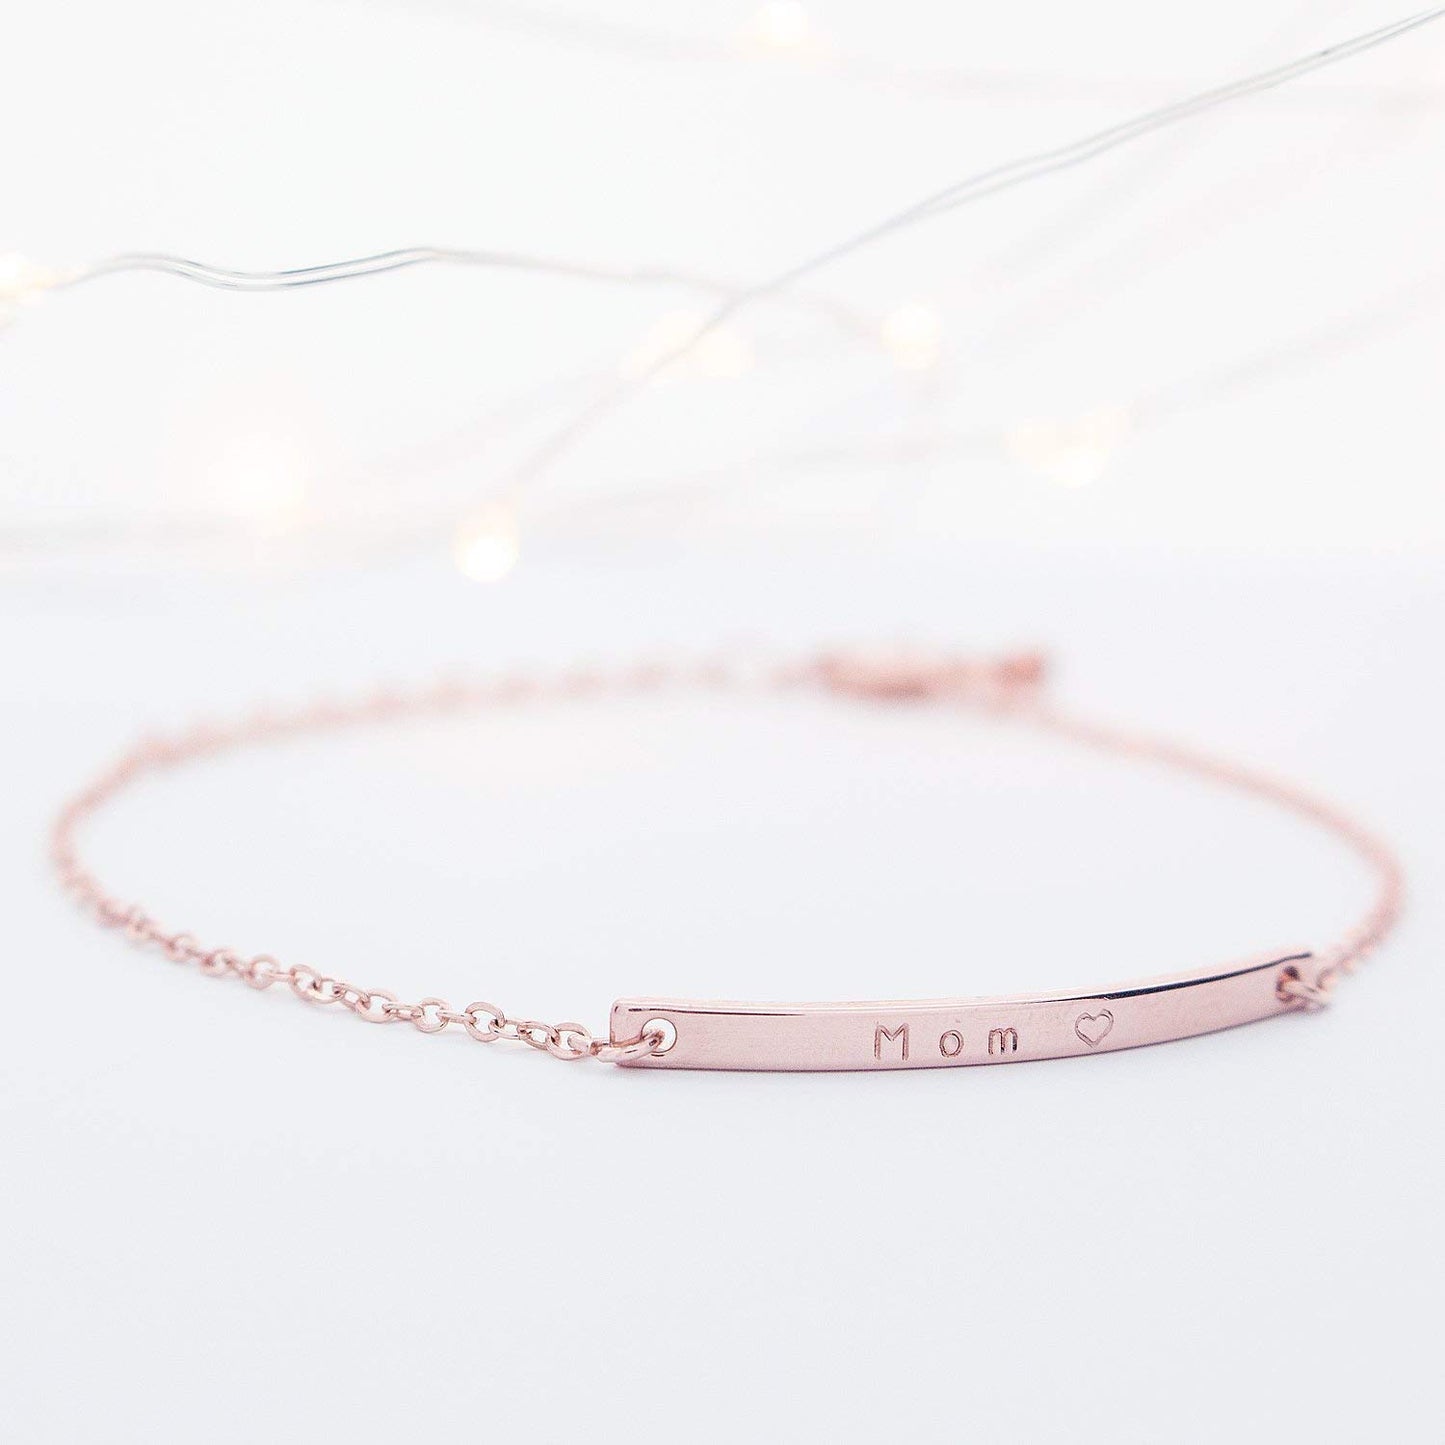 Name Bracelet Dainty Personalized Gold Silver Rose Gold Plated